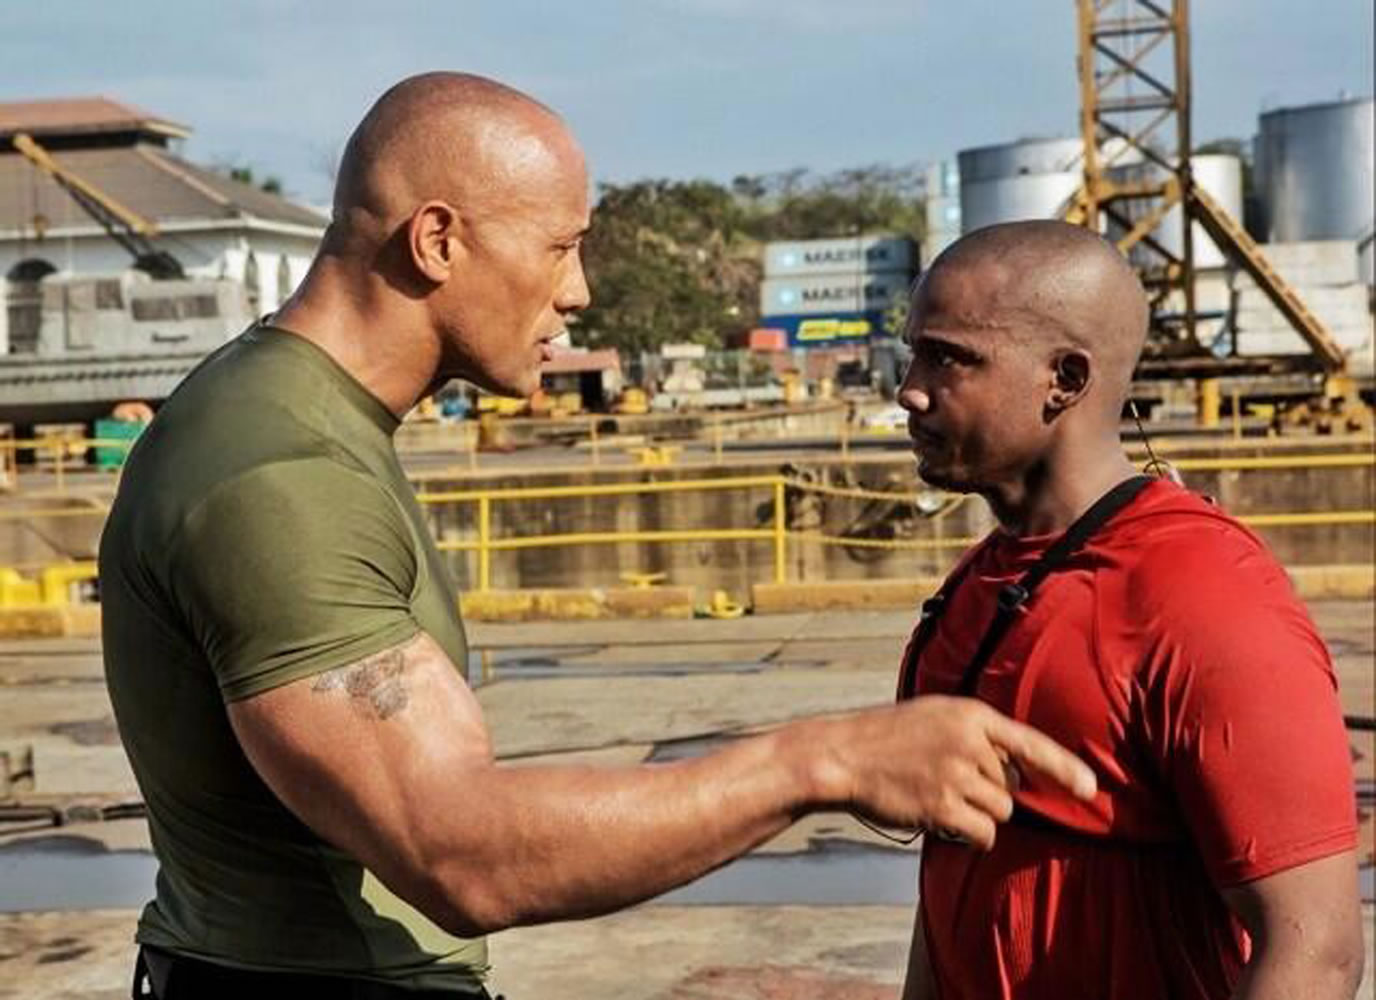 TNT
Darnell McAdams, right, learns about heroics from Dwayne &quot;The Rock&quot; Johnson on the new TNT competition series &quot;The Hero.&quot; Giving a hint about what's to come when the show premieres Thursday, Johnson sent the photo of the 32-year-old father to nearly 4.8 million Twitter users with the message: &quot;Family means everything to this man. Real men may cry ... they also overcome.&quot;